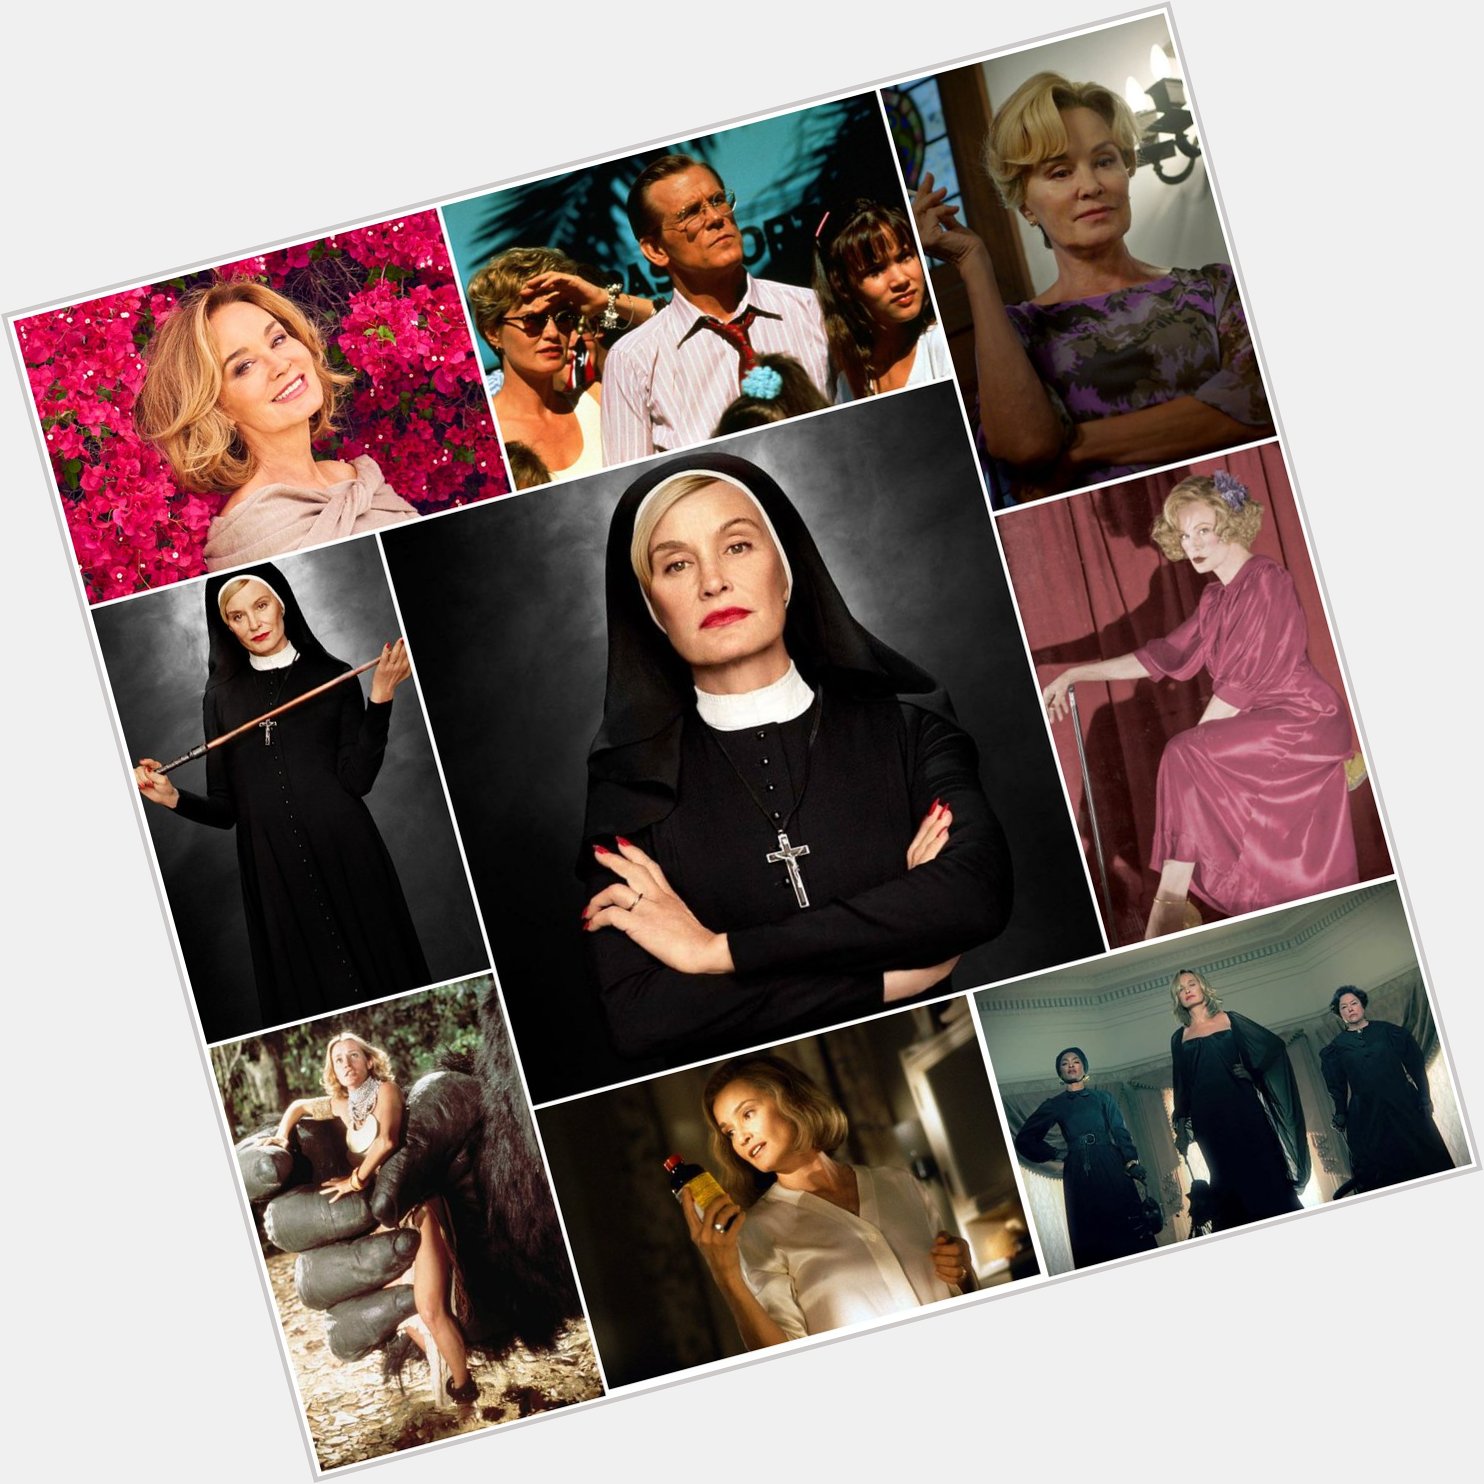 Happy Birthday to Jessica Lange. One of my all-time favorite actresses. 